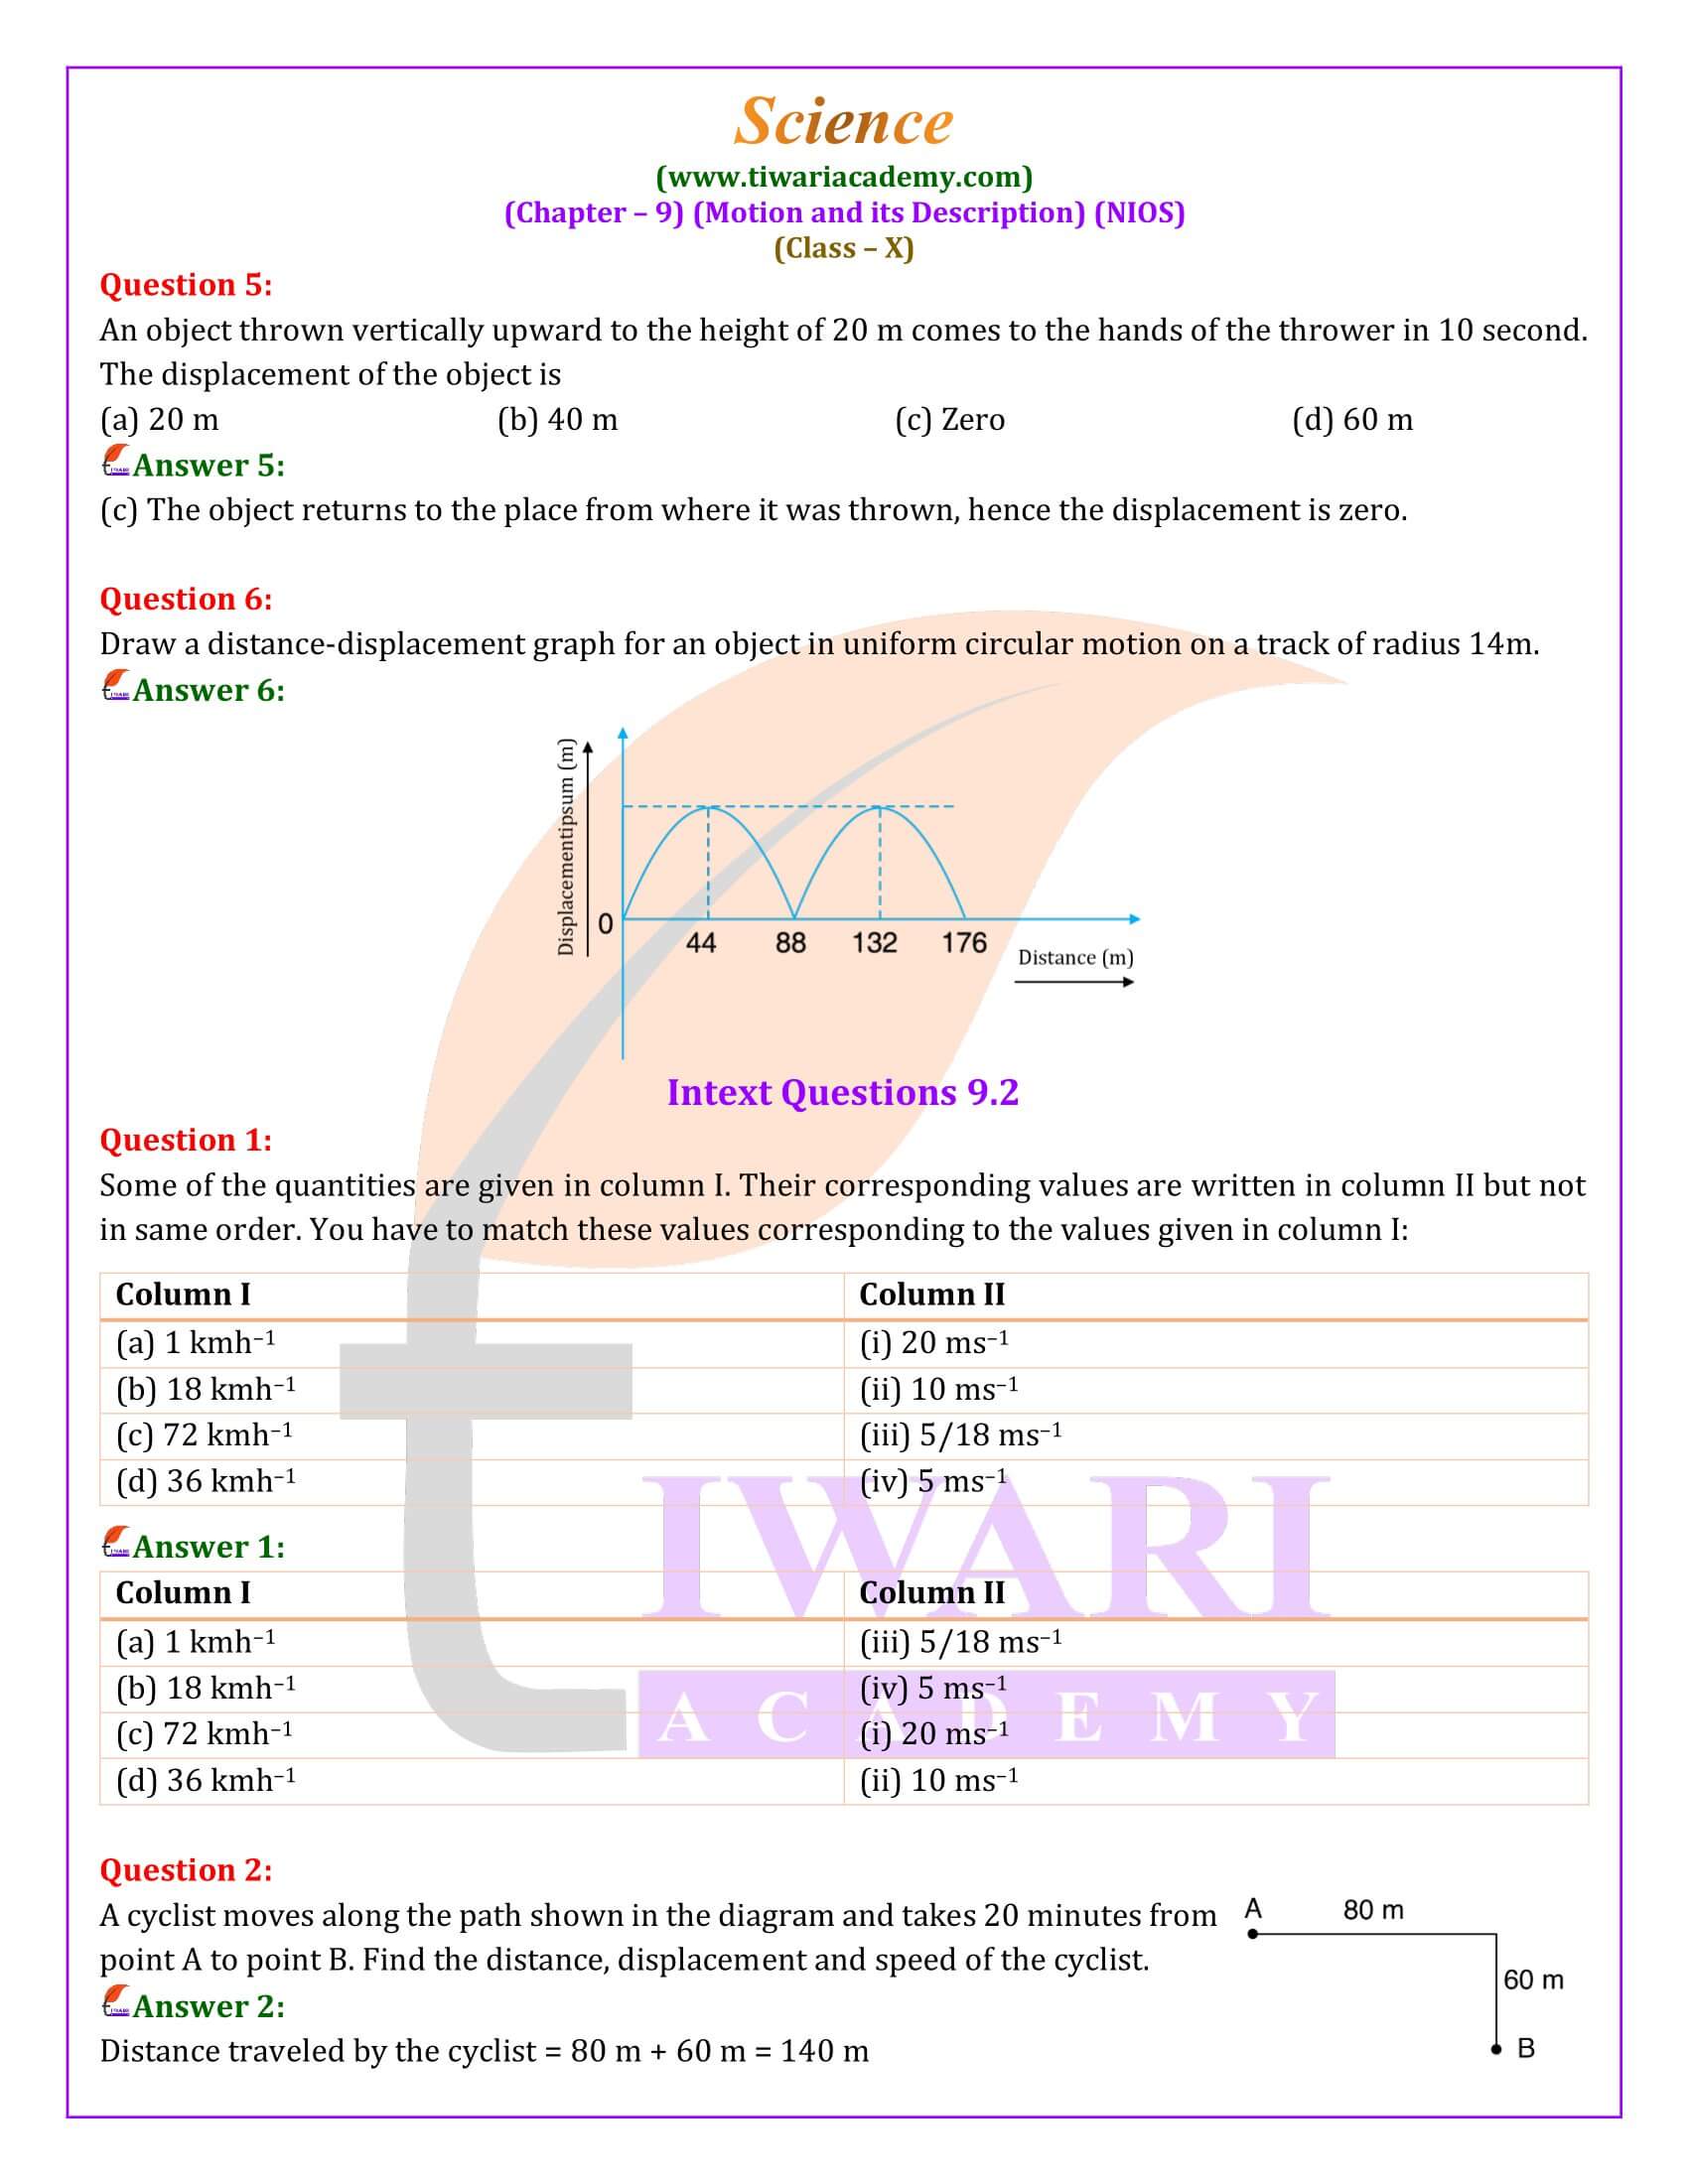 NIOS Class 10 Science Chapter 9 Motion and its Description Answers